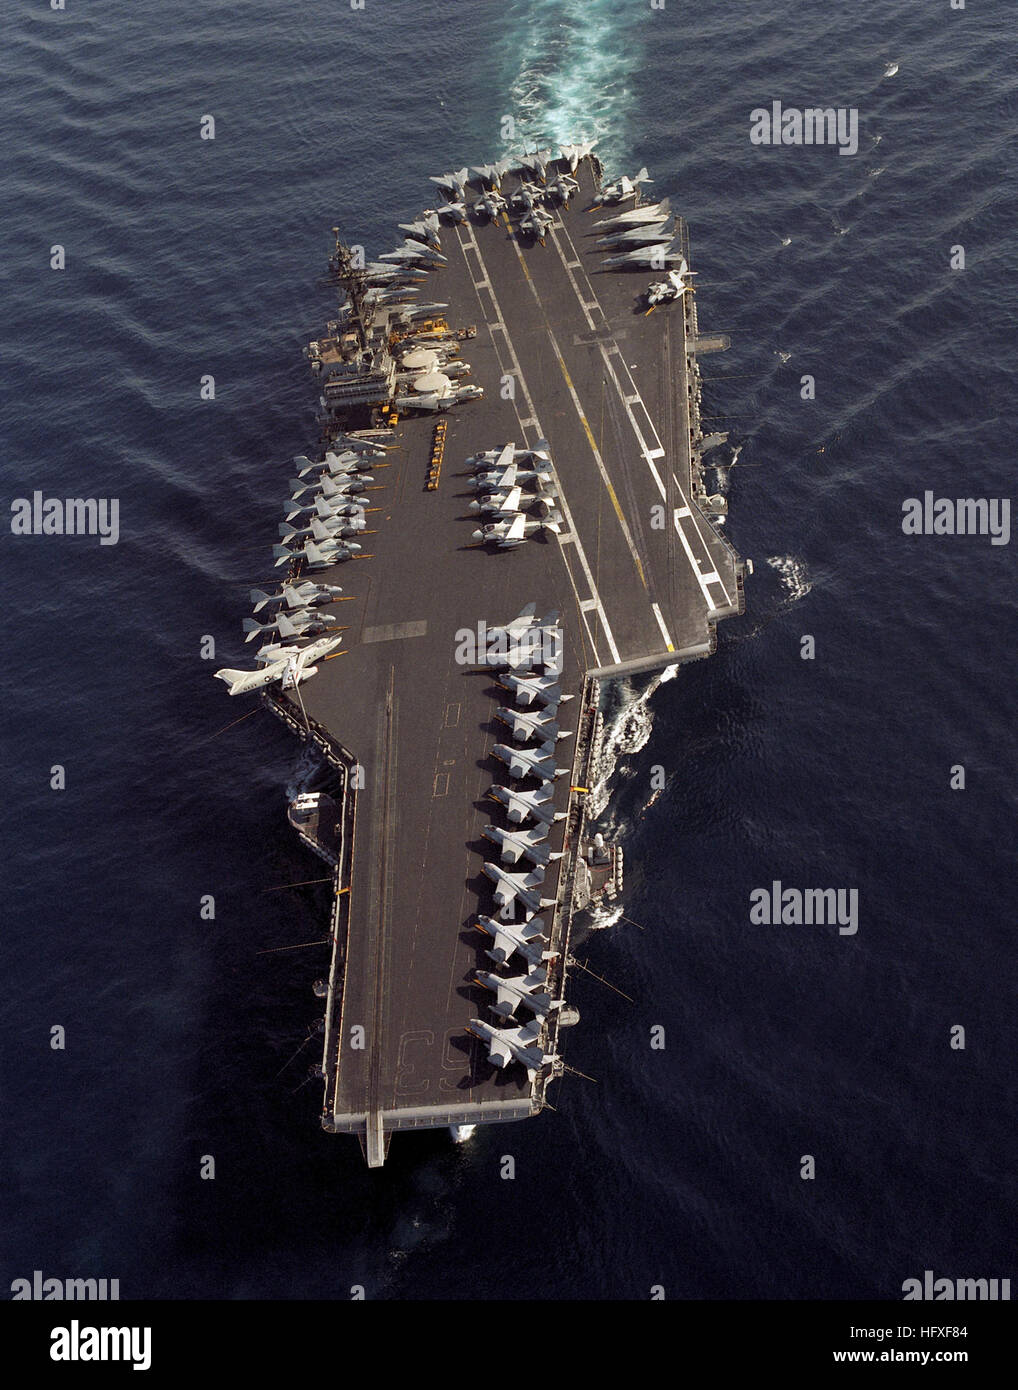 An overhead view of the aircraft carrier USS KITTY HAWK (CV 63) underway.  USS Kitty Hawk (CV-63) overhead view Stock Photo - Alamy